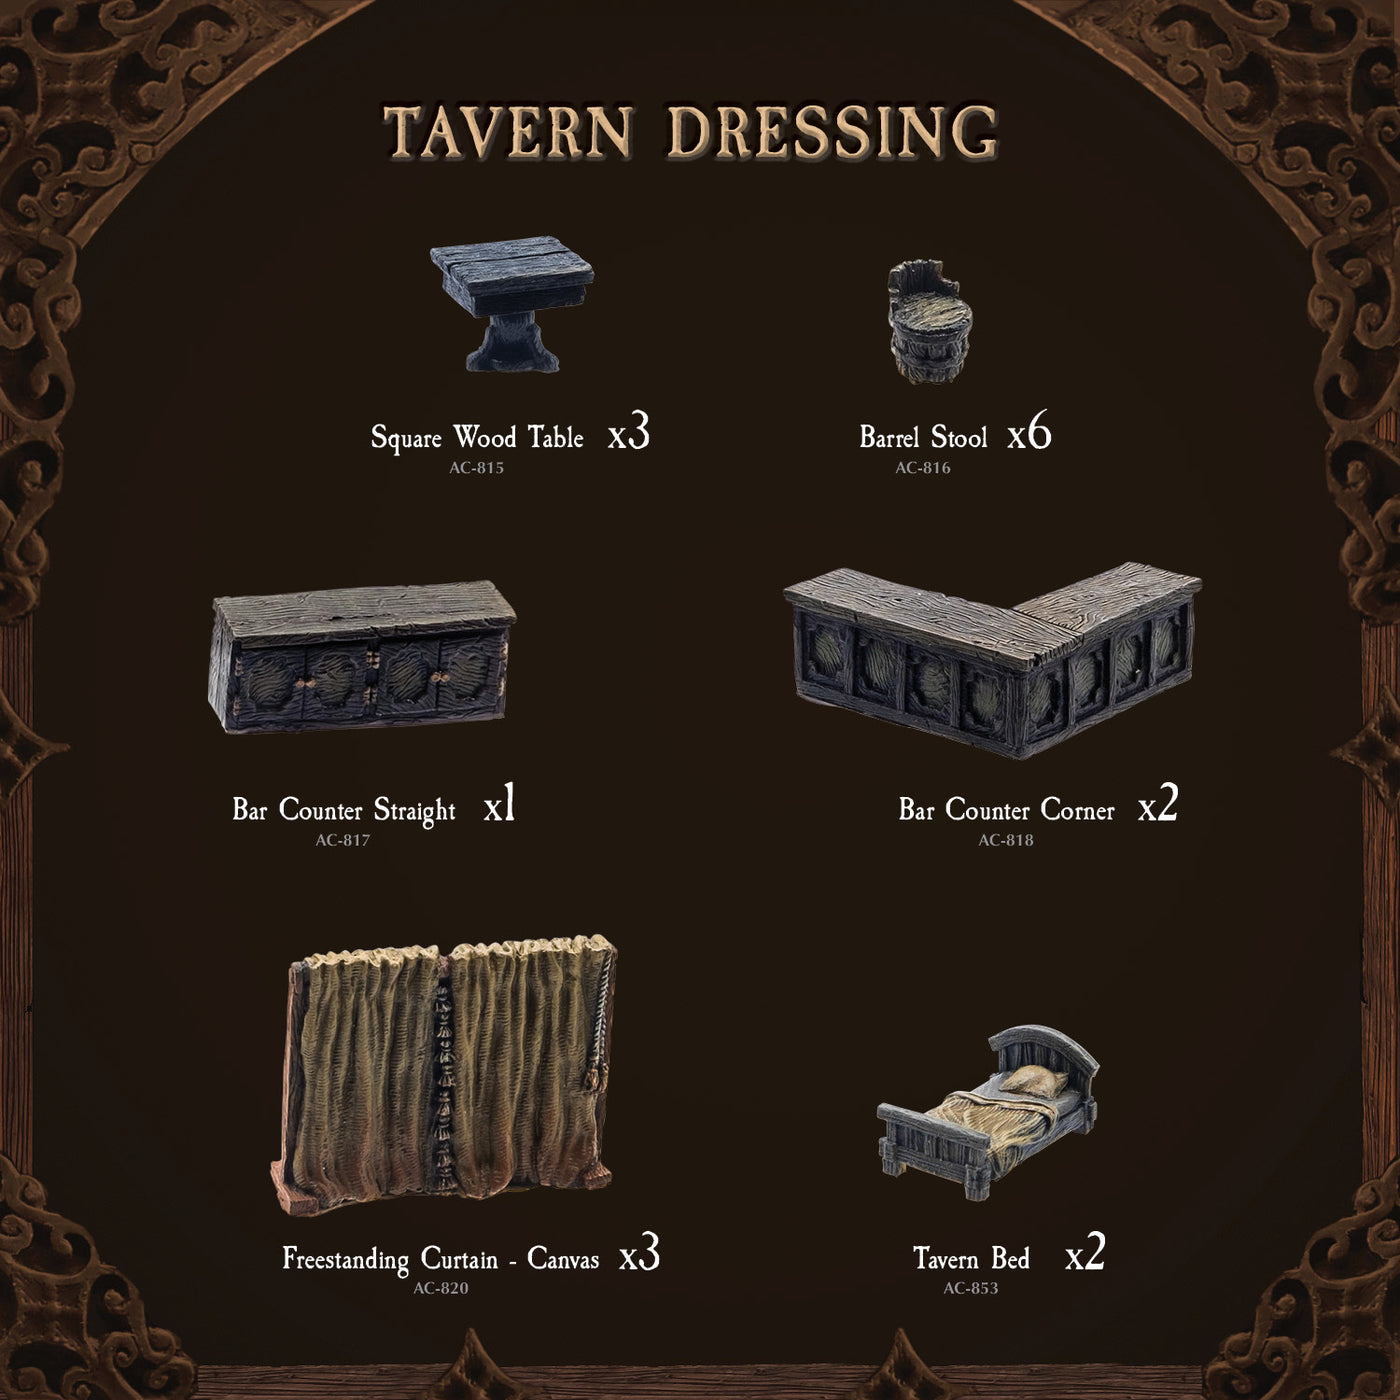 Lowtown Tavern Dressing (Painted)